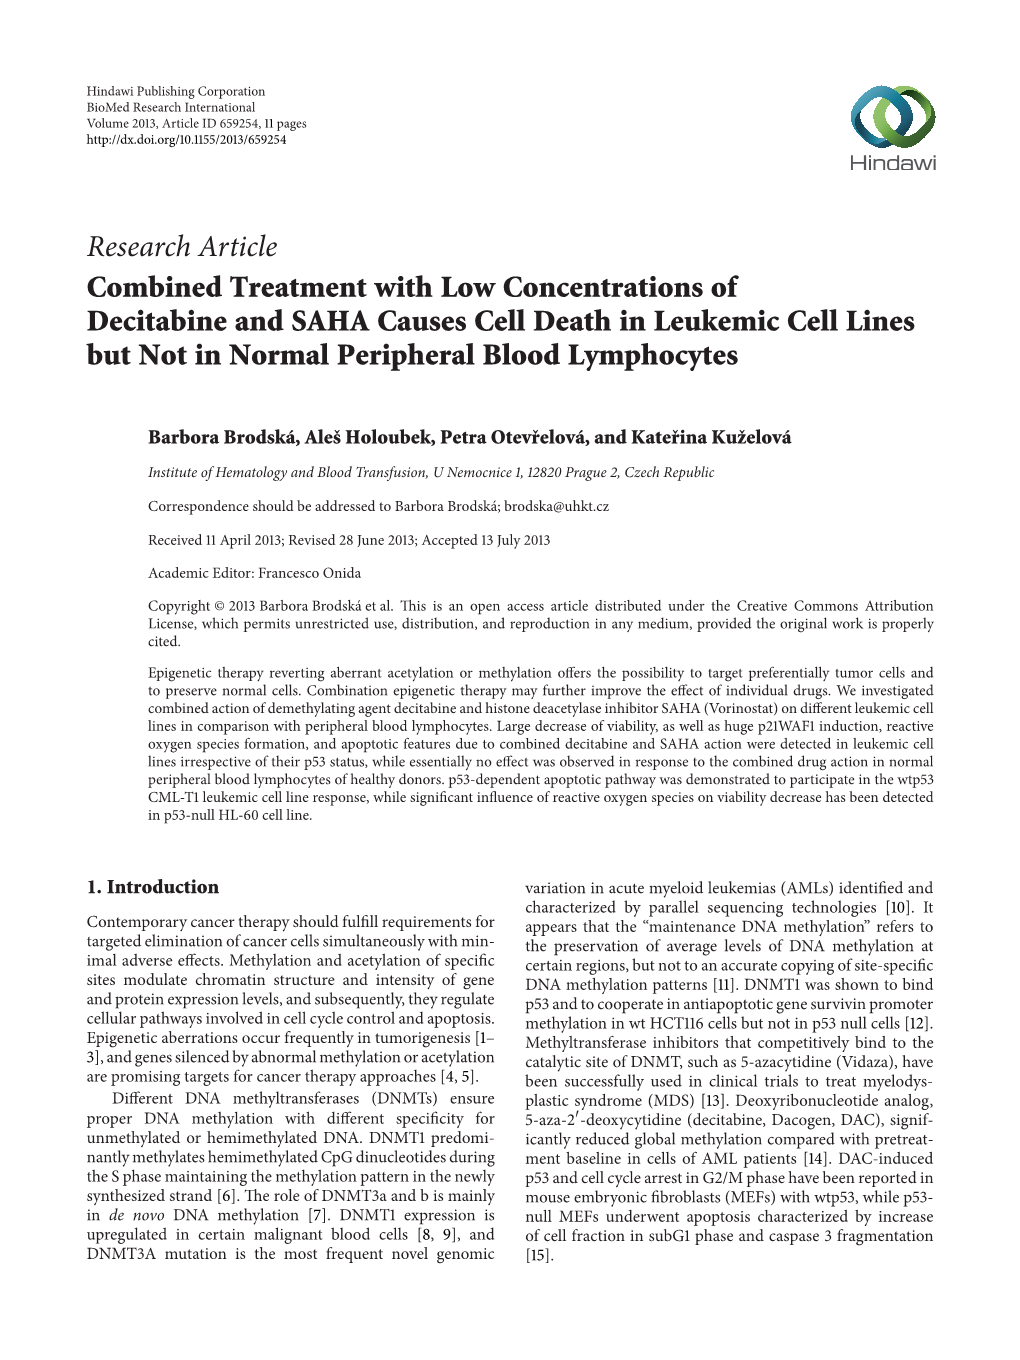 Combined Treatment with Low Concentrations of Decitabine and SAHA Causes Cell Death in Leukemic Cell Lines but Not in Normal Peripheral Blood Lymphocytes